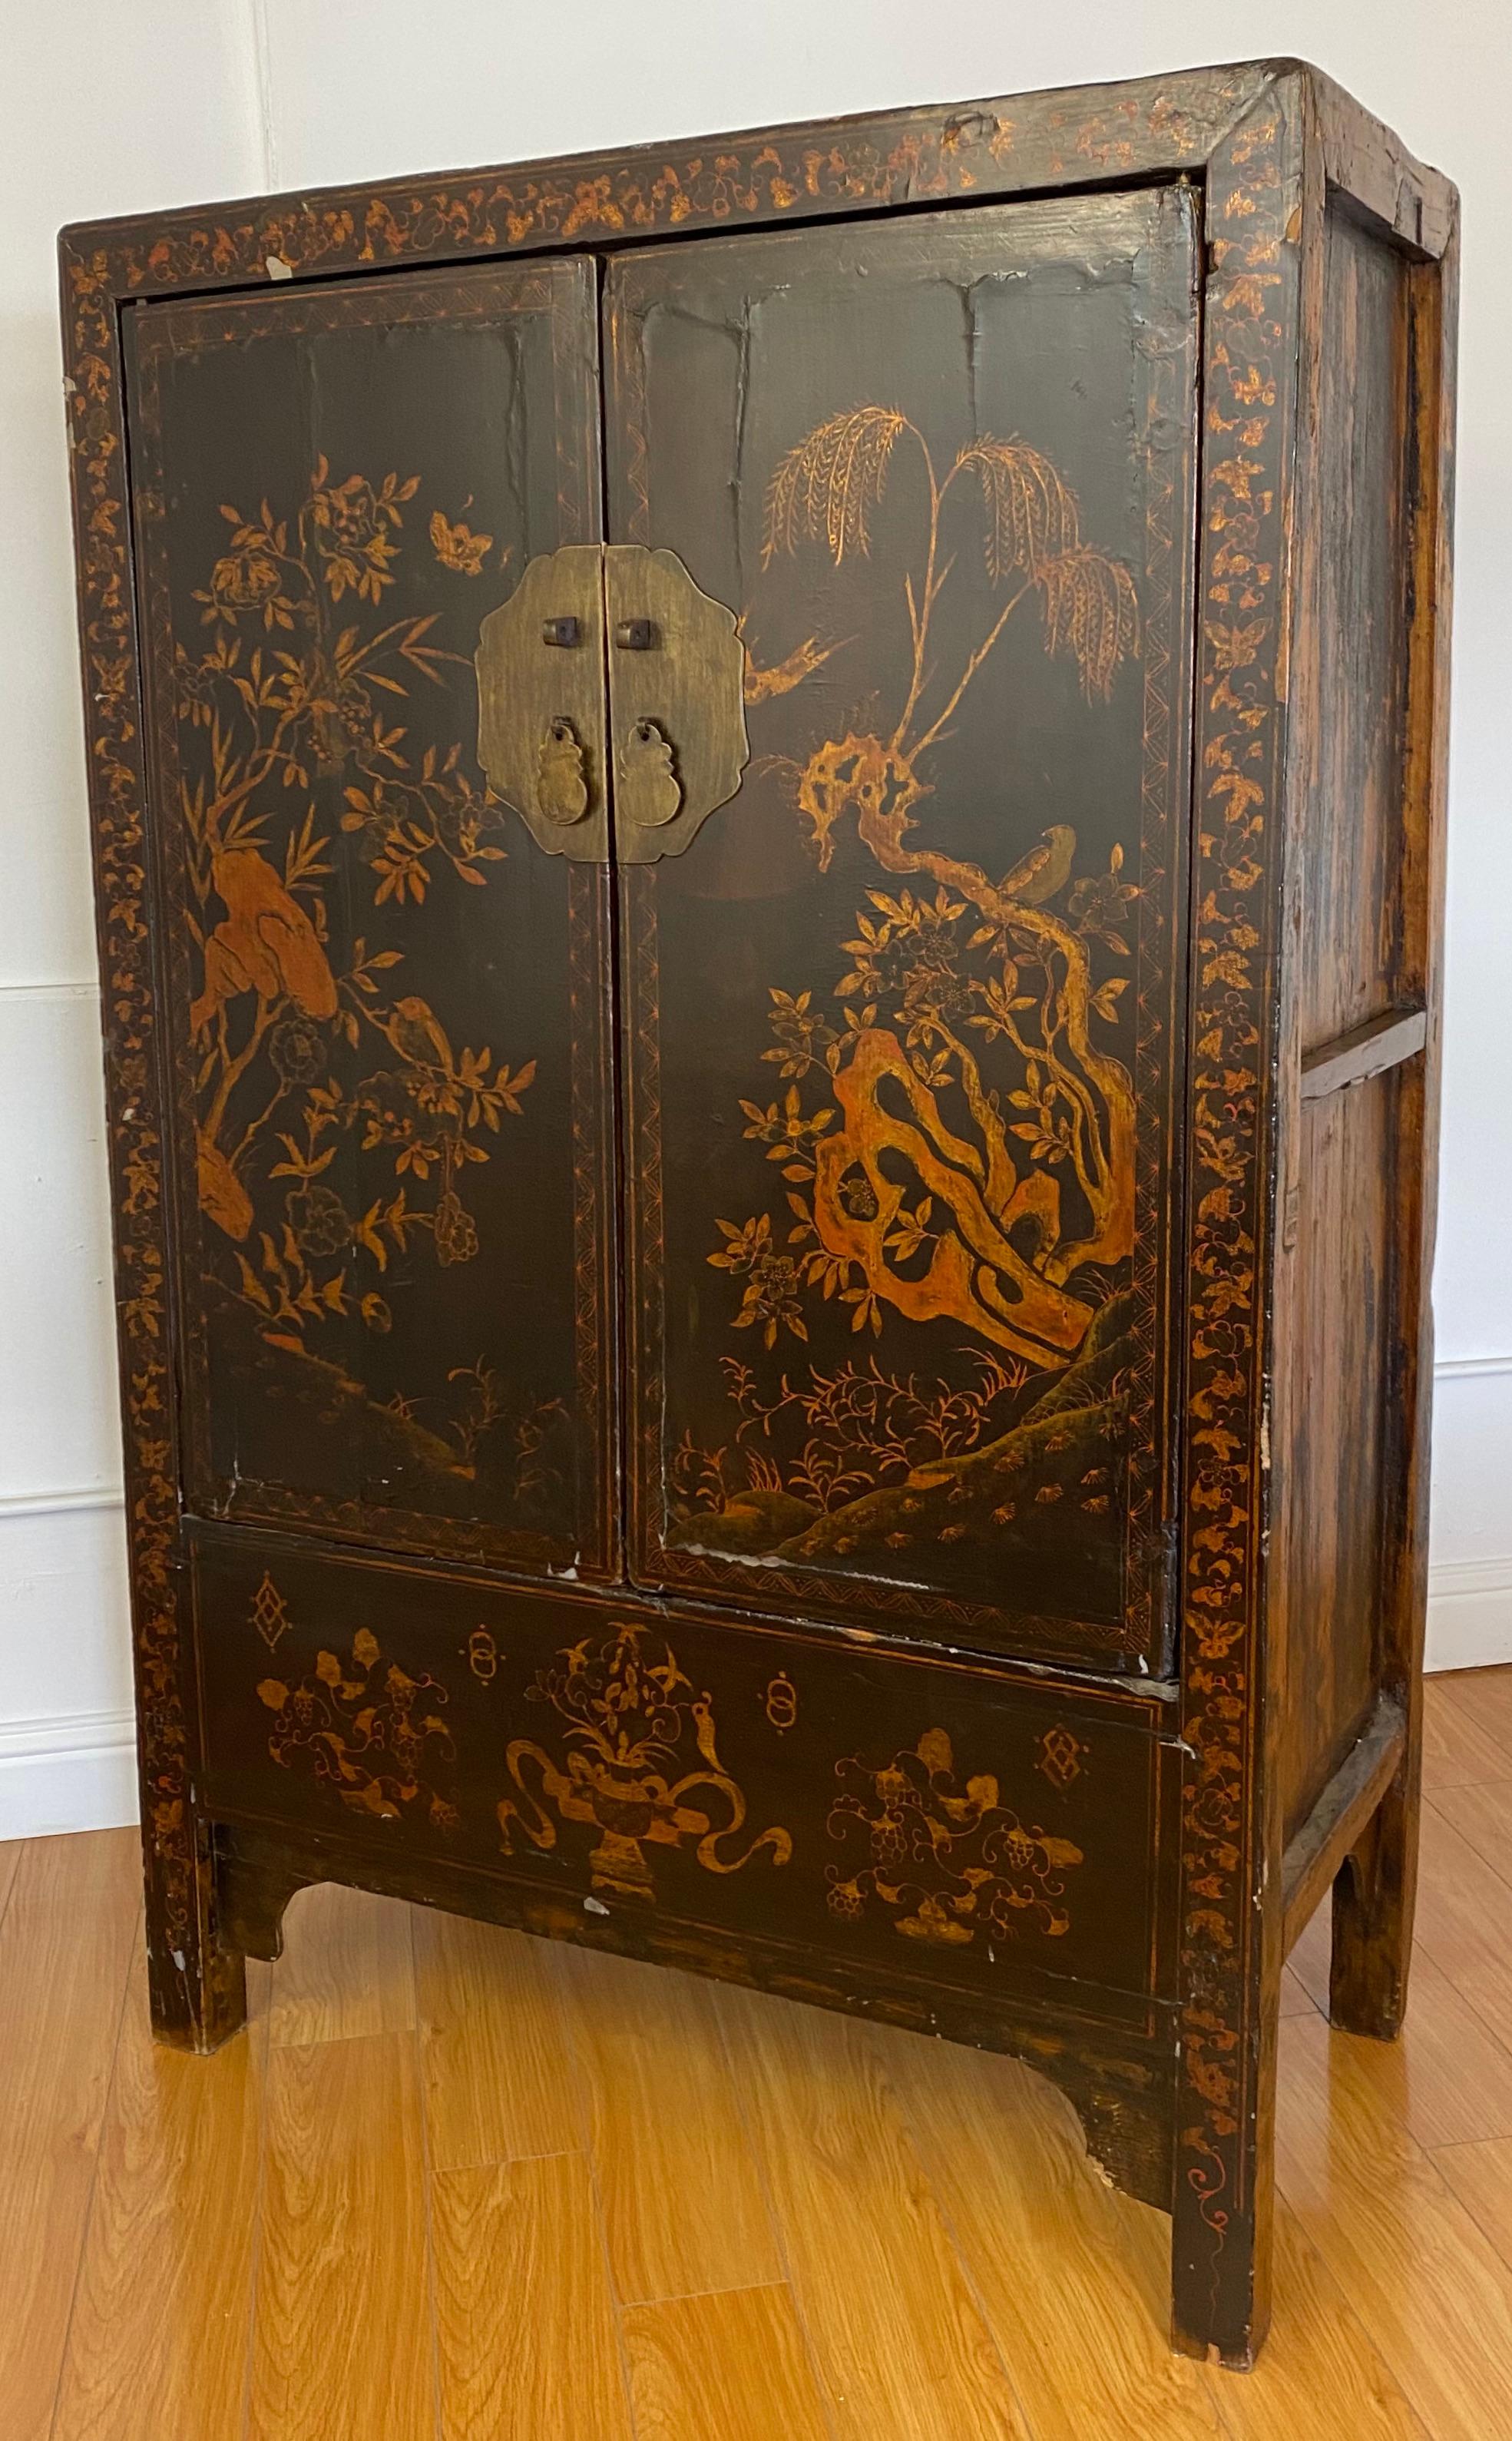 19th century ebonized Chinese Tansu cabinet.

Antique cabinet with single shelf and a lower hidden space

Measures: 43